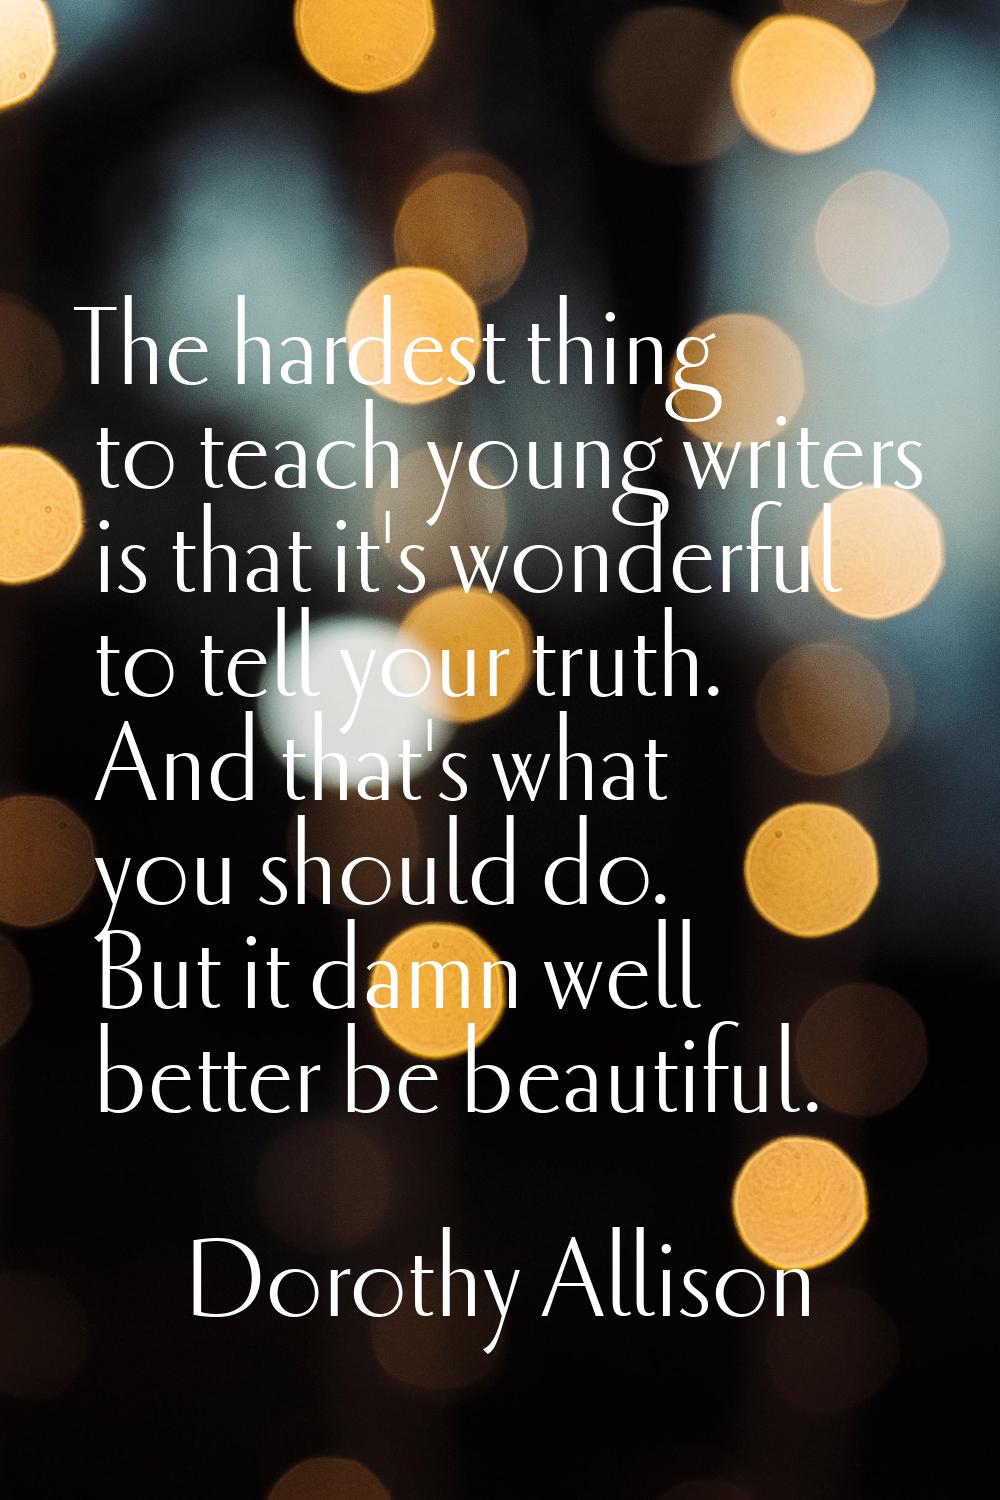 The hardest thing to teach young writers is that it's wonderful to tell your truth. And that's what